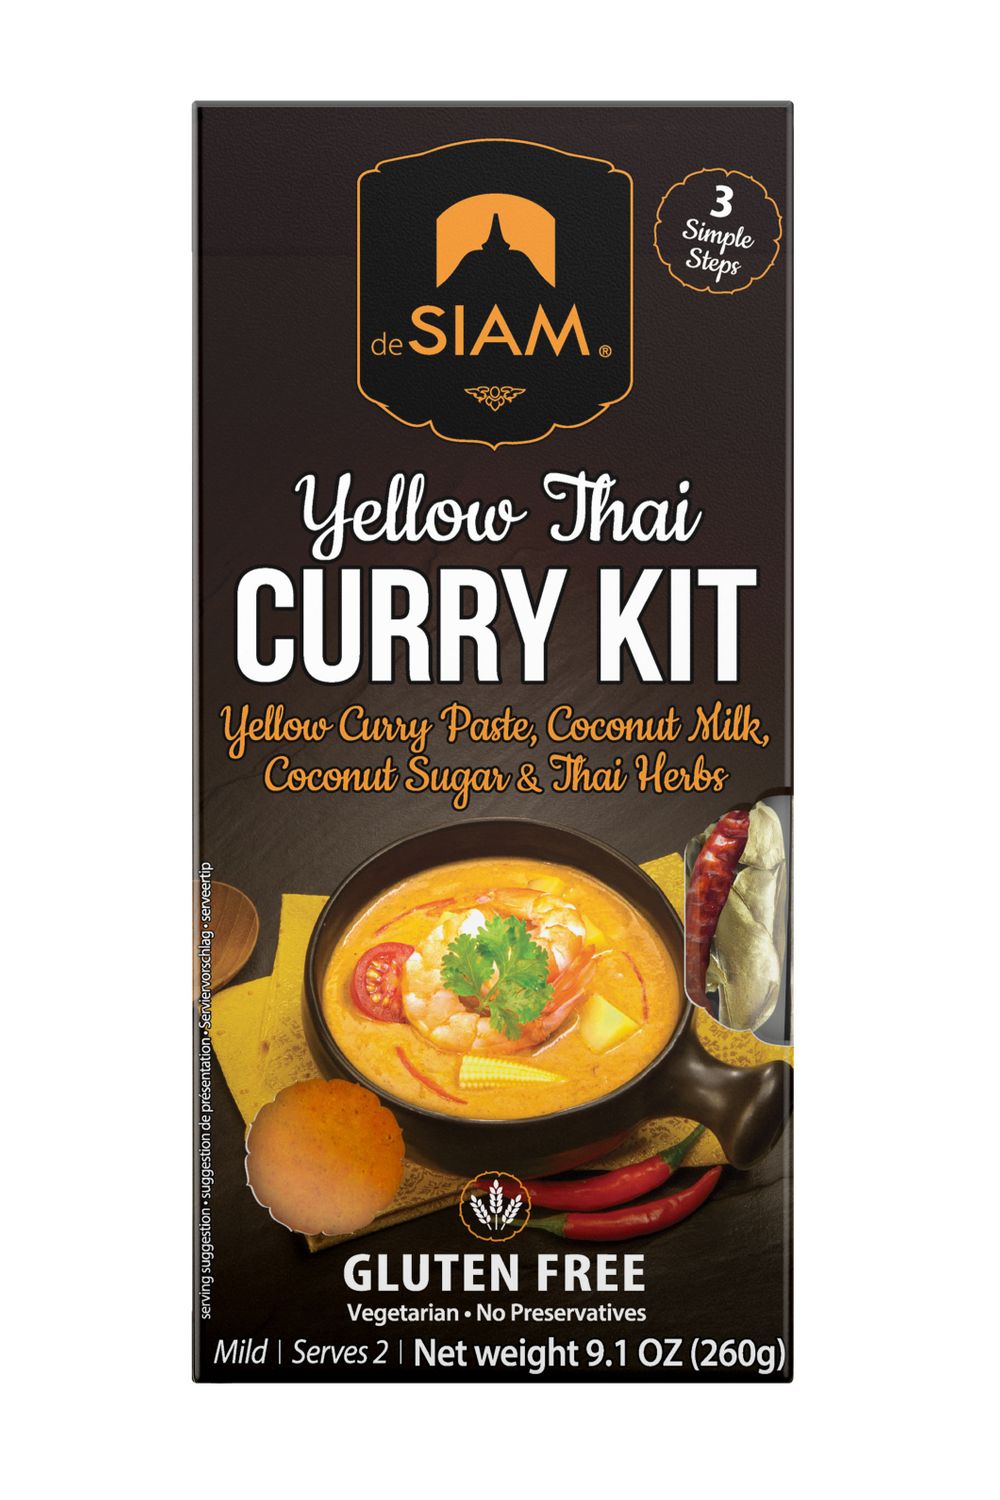 Yellow Curry Meal Kit